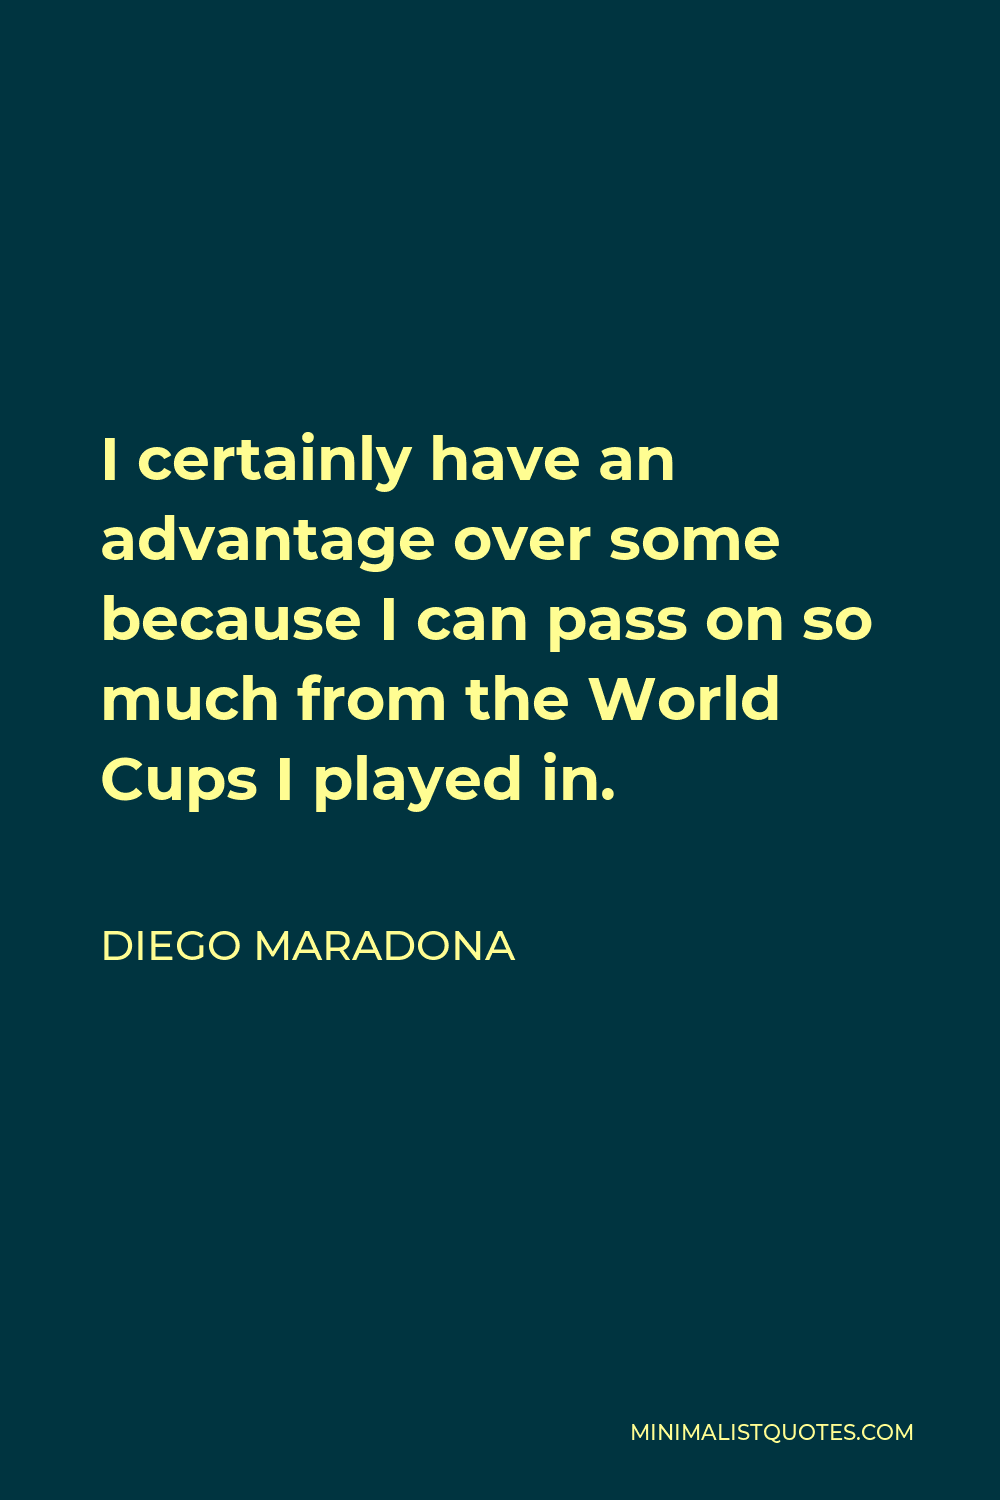 Diego Maradona Quote - I certainly have an advantage over some because I can pass on so much from the World Cups I played in.